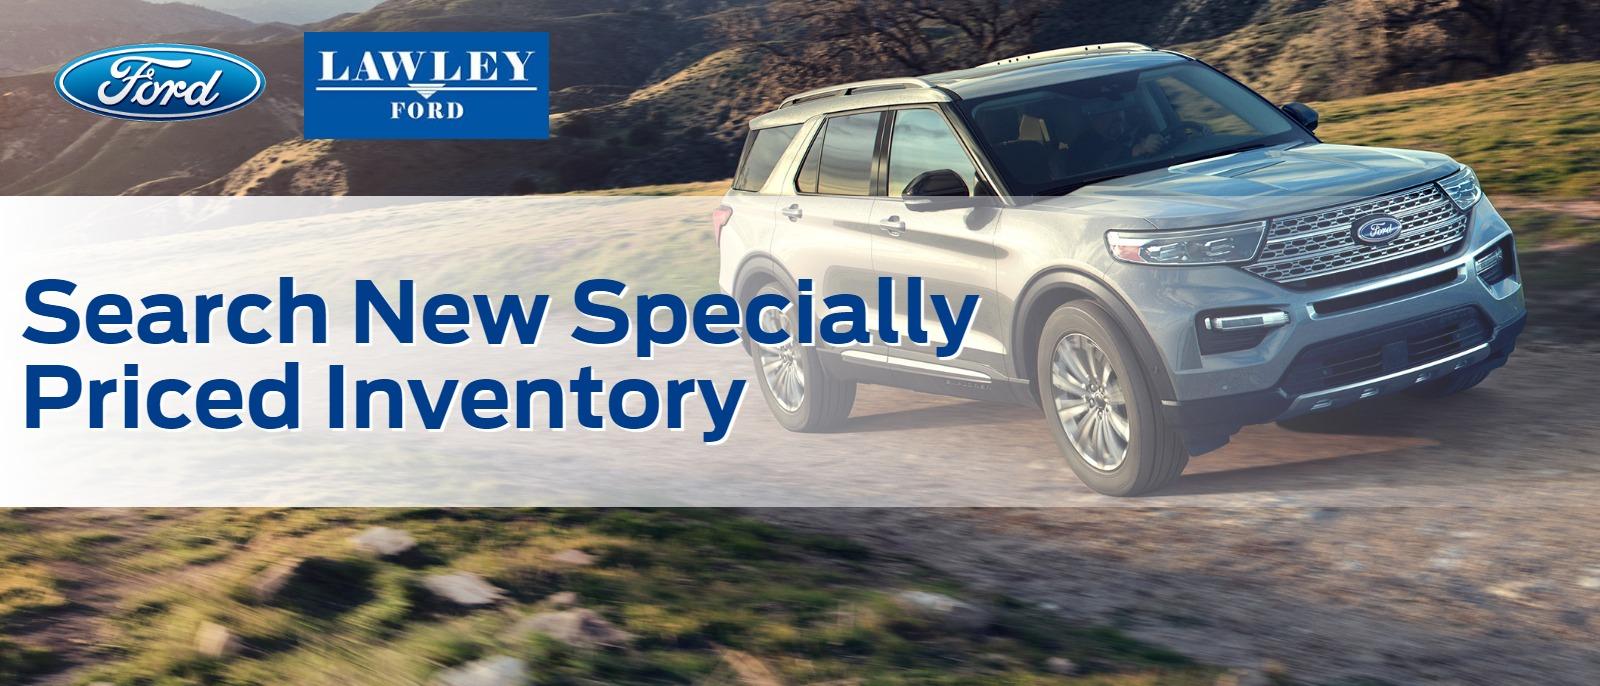 Search New Specially Priced Inventory